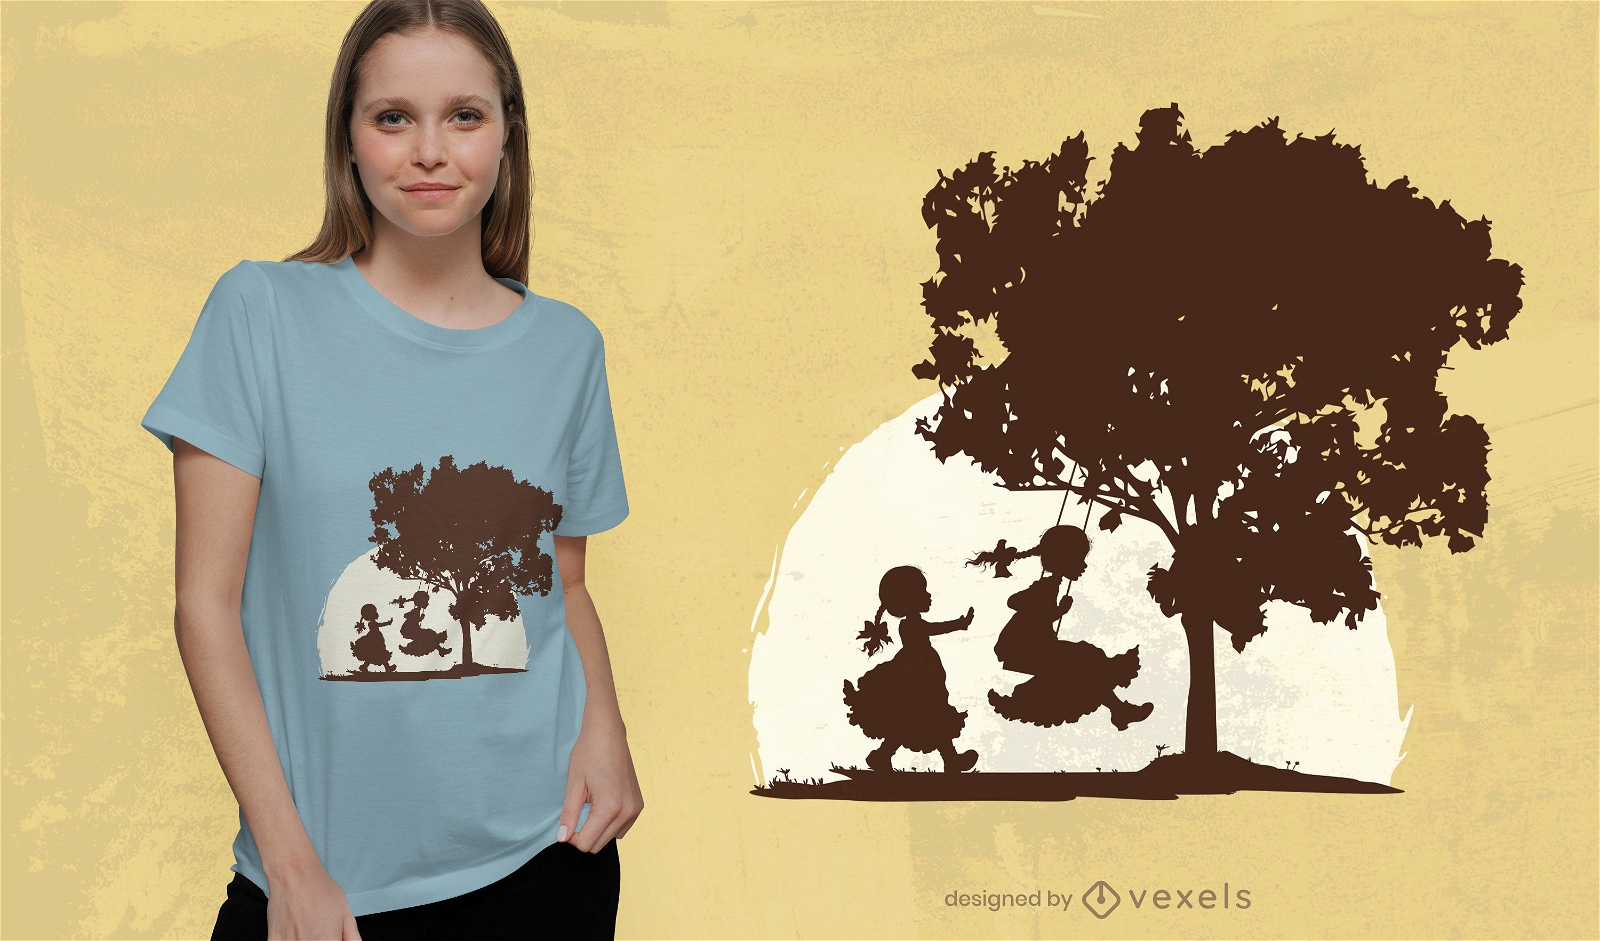 Sisters playing t-shirt design